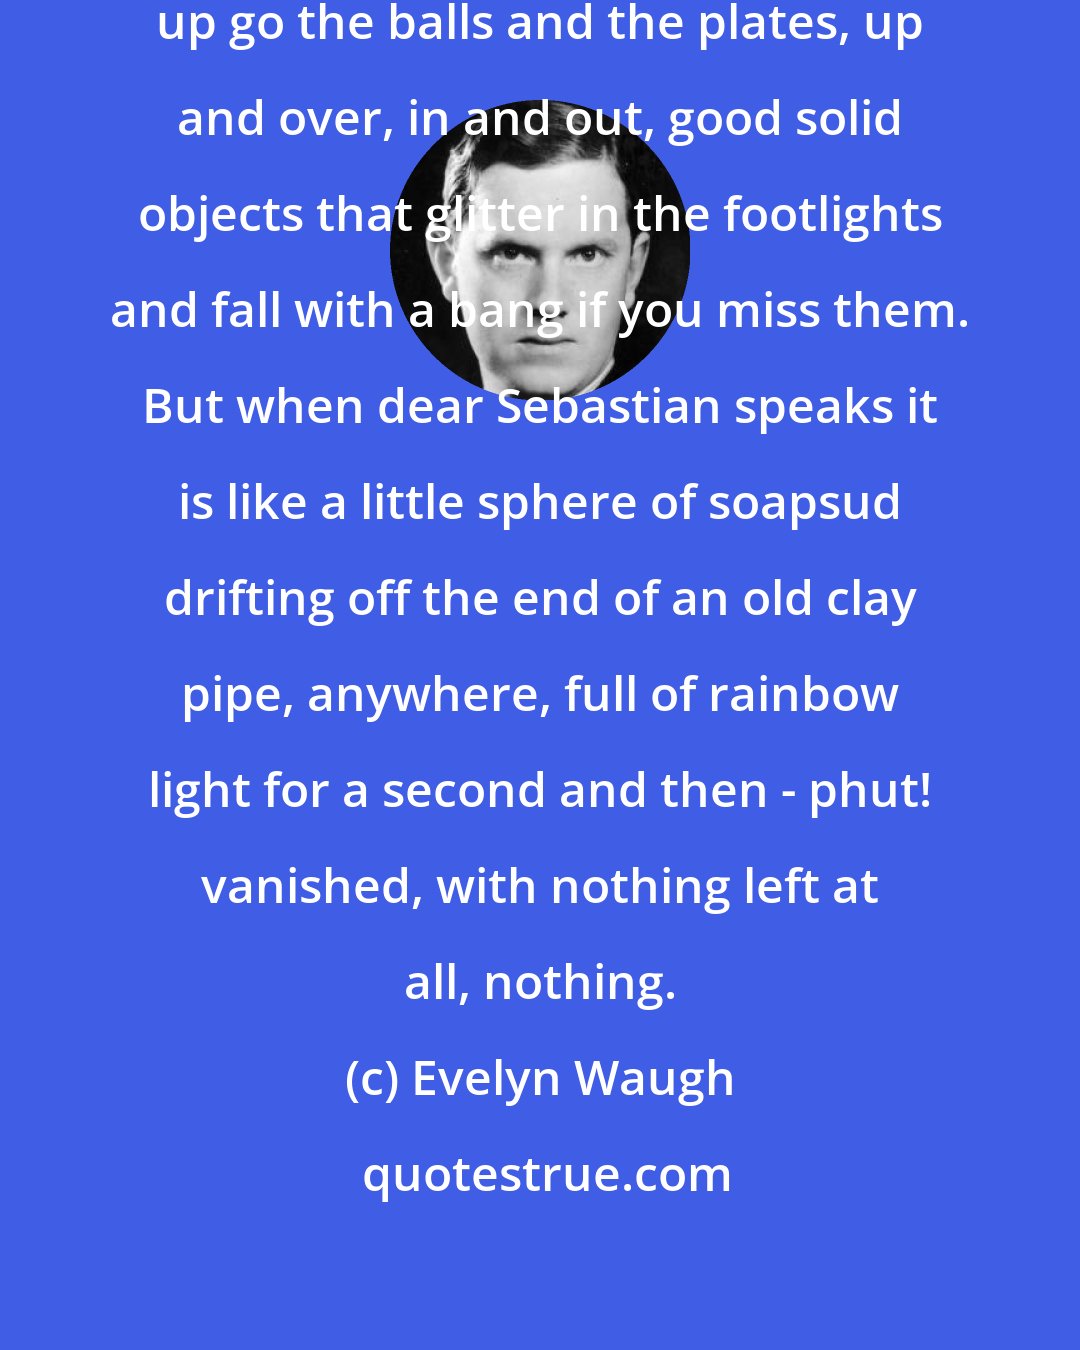 Evelyn Waugh: Conversation should be like juggling; up go the balls and the plates, up and over, in and out, good solid objects that glitter in the footlights and fall with a bang if you miss them. But when dear Sebastian speaks it is like a little sphere of soapsud drifting off the end of an old clay pipe, anywhere, full of rainbow light for a second and then - phut! vanished, with nothing left at all, nothing.